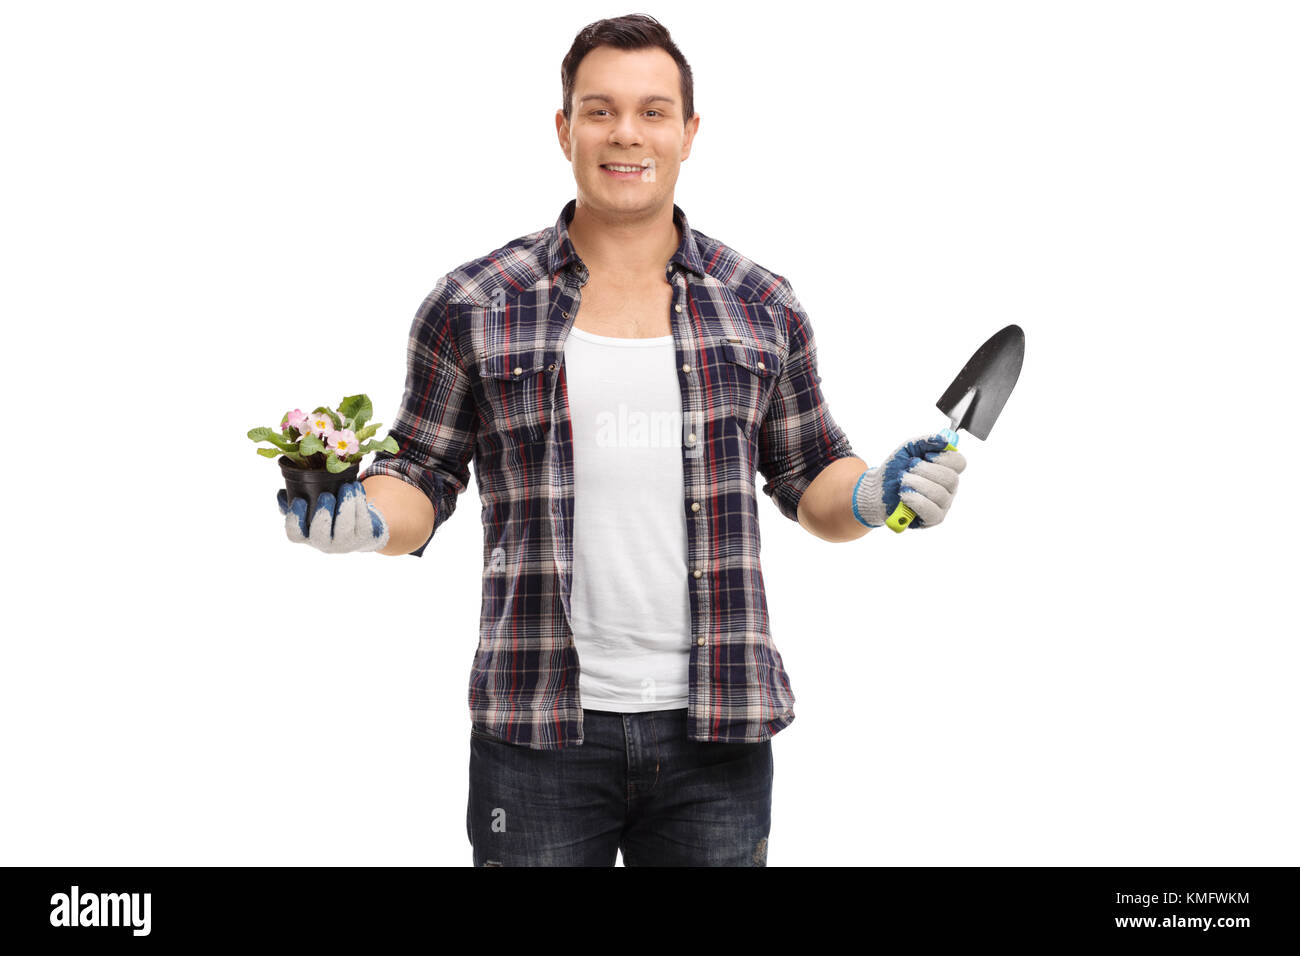 Gardener holding a flower in a pot and a spade isolated on white background Stock Photo